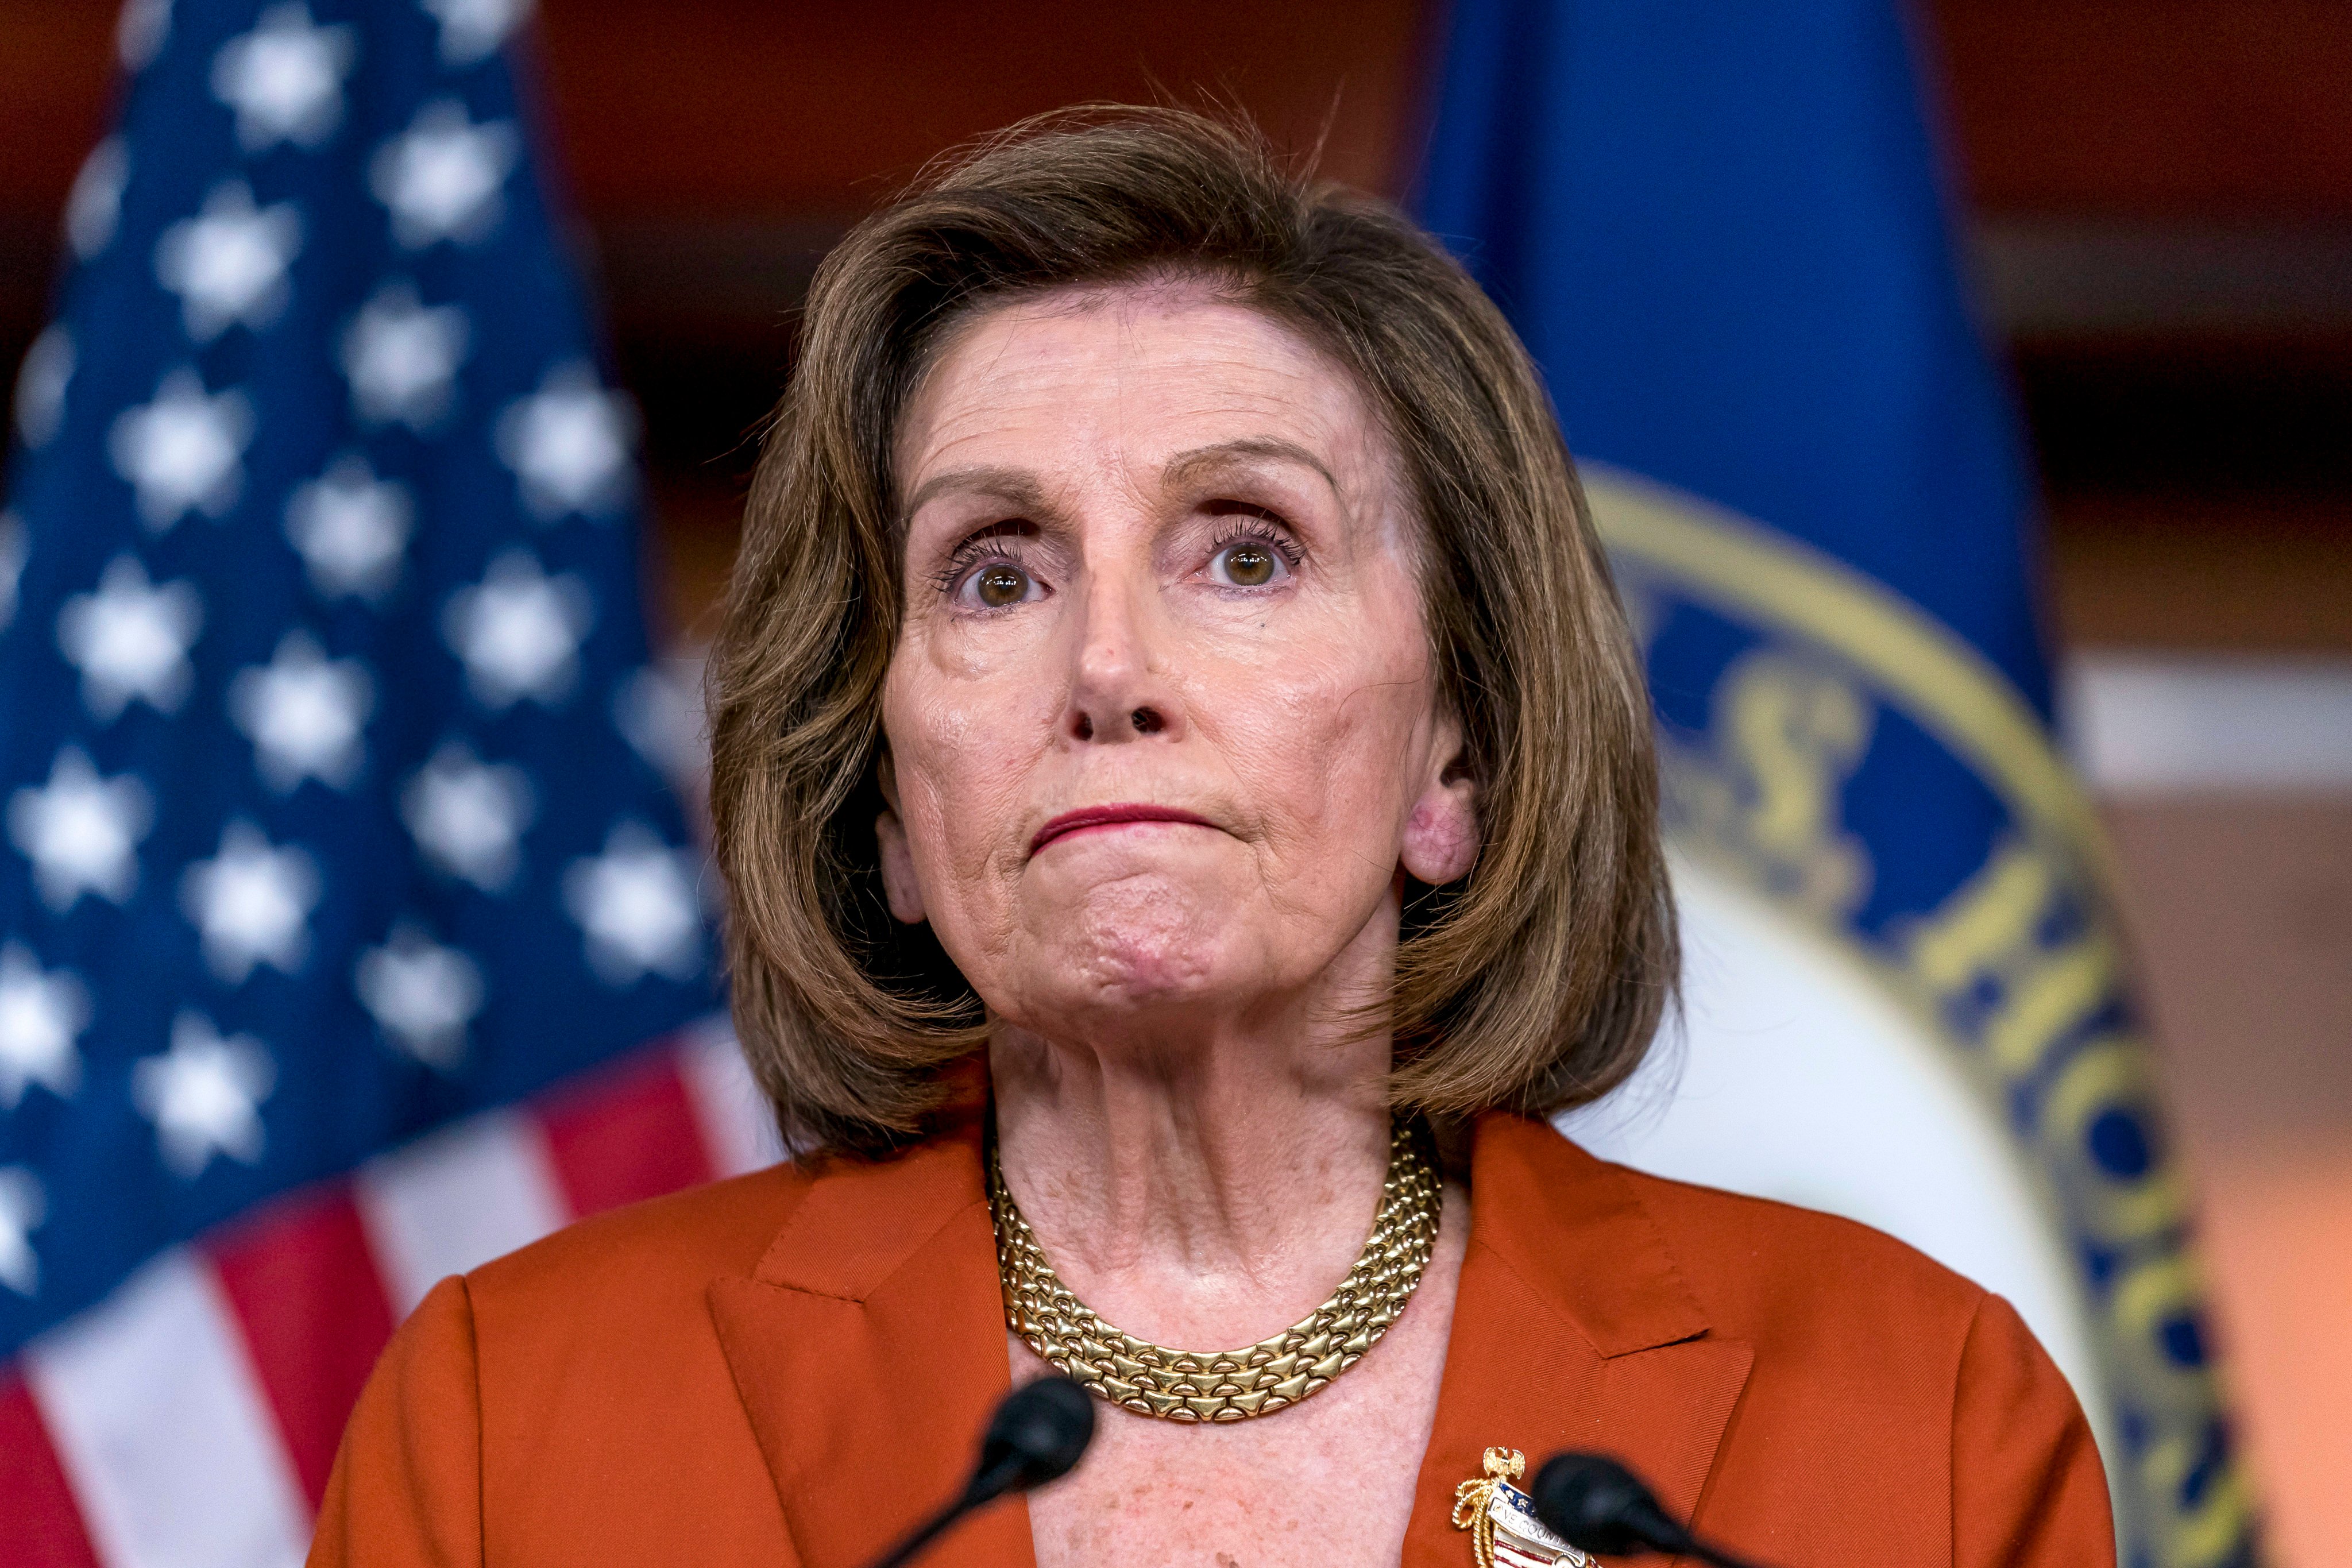 Speaker of the US House of Representatives Nancy Pelosi attends a news conference in Washington on June 24. Beijing has warned against Pelosi’s proposed visit to Taiwan, amid growing tensions. Photo: AP